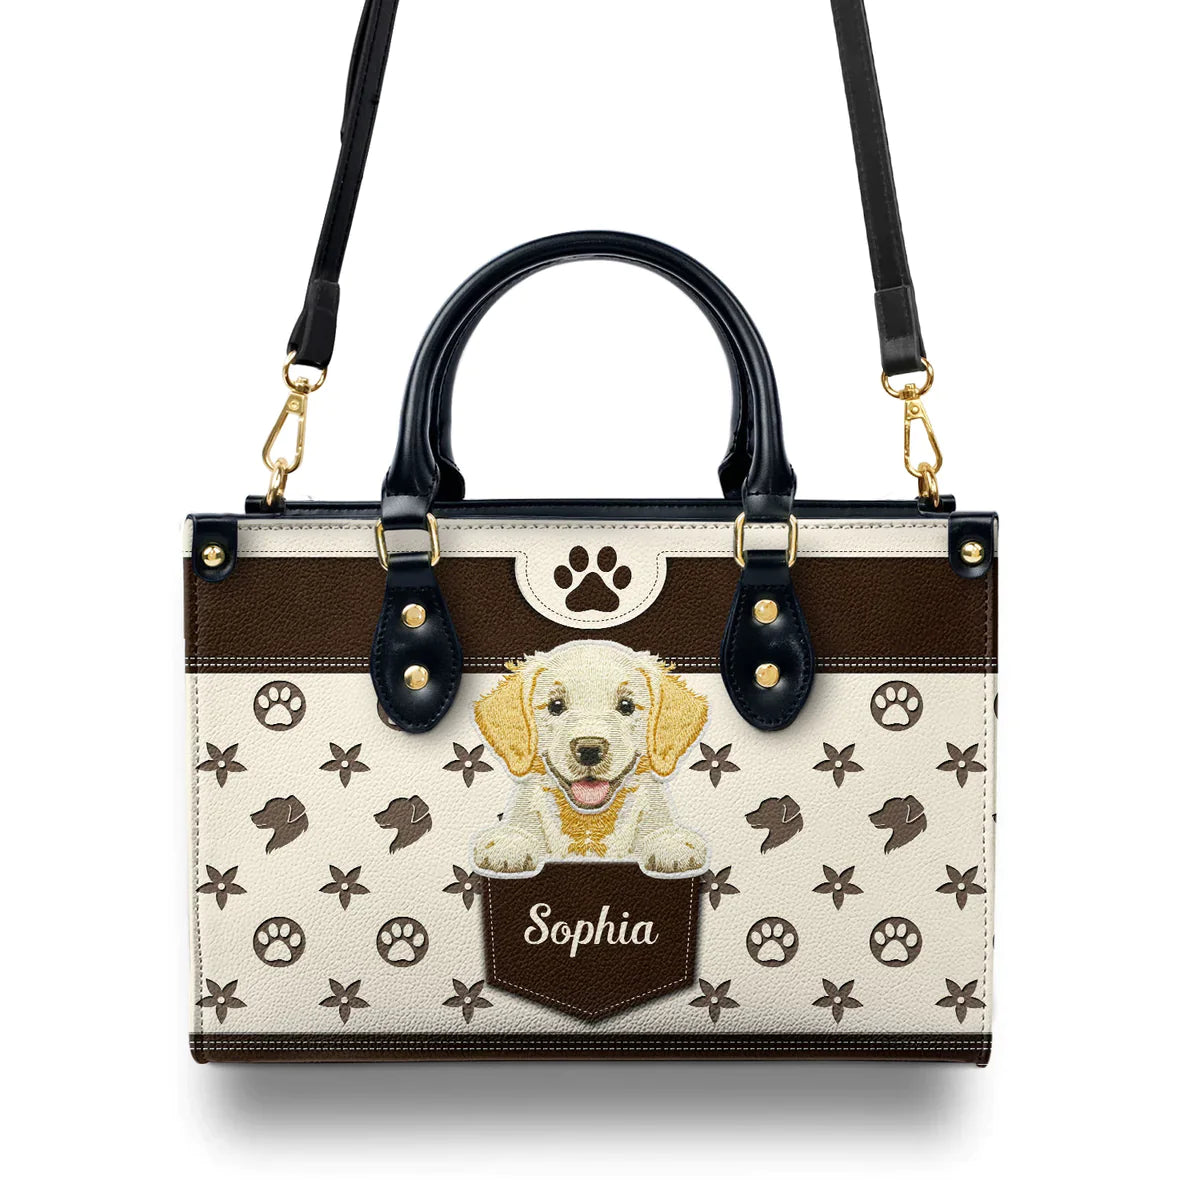 Golden Retriever Puppy Embroidery Style Leather Bag